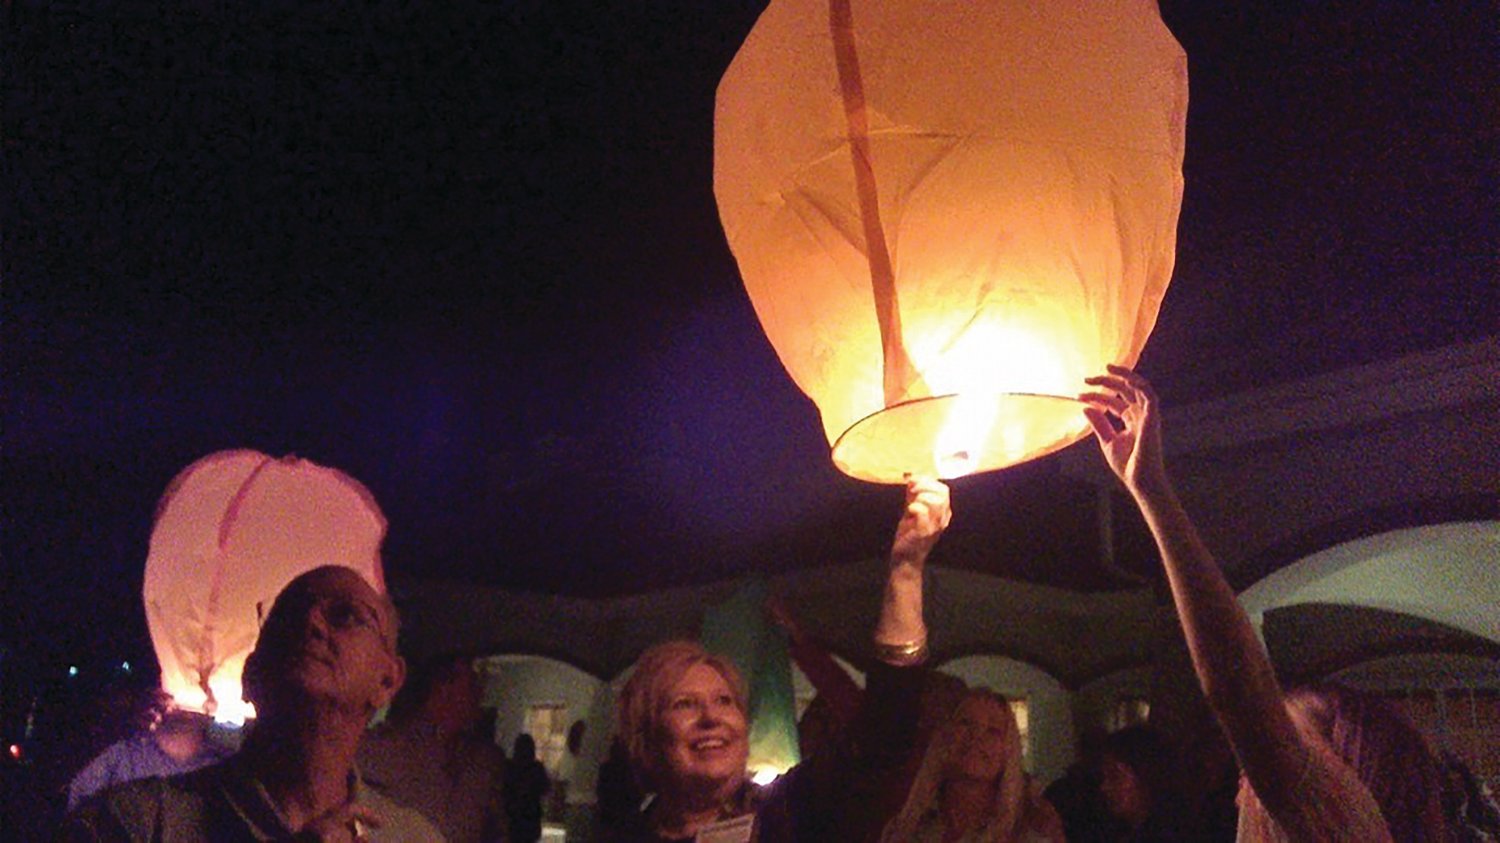 Sky lanterns are released as part of the Night of Remembrance each year.